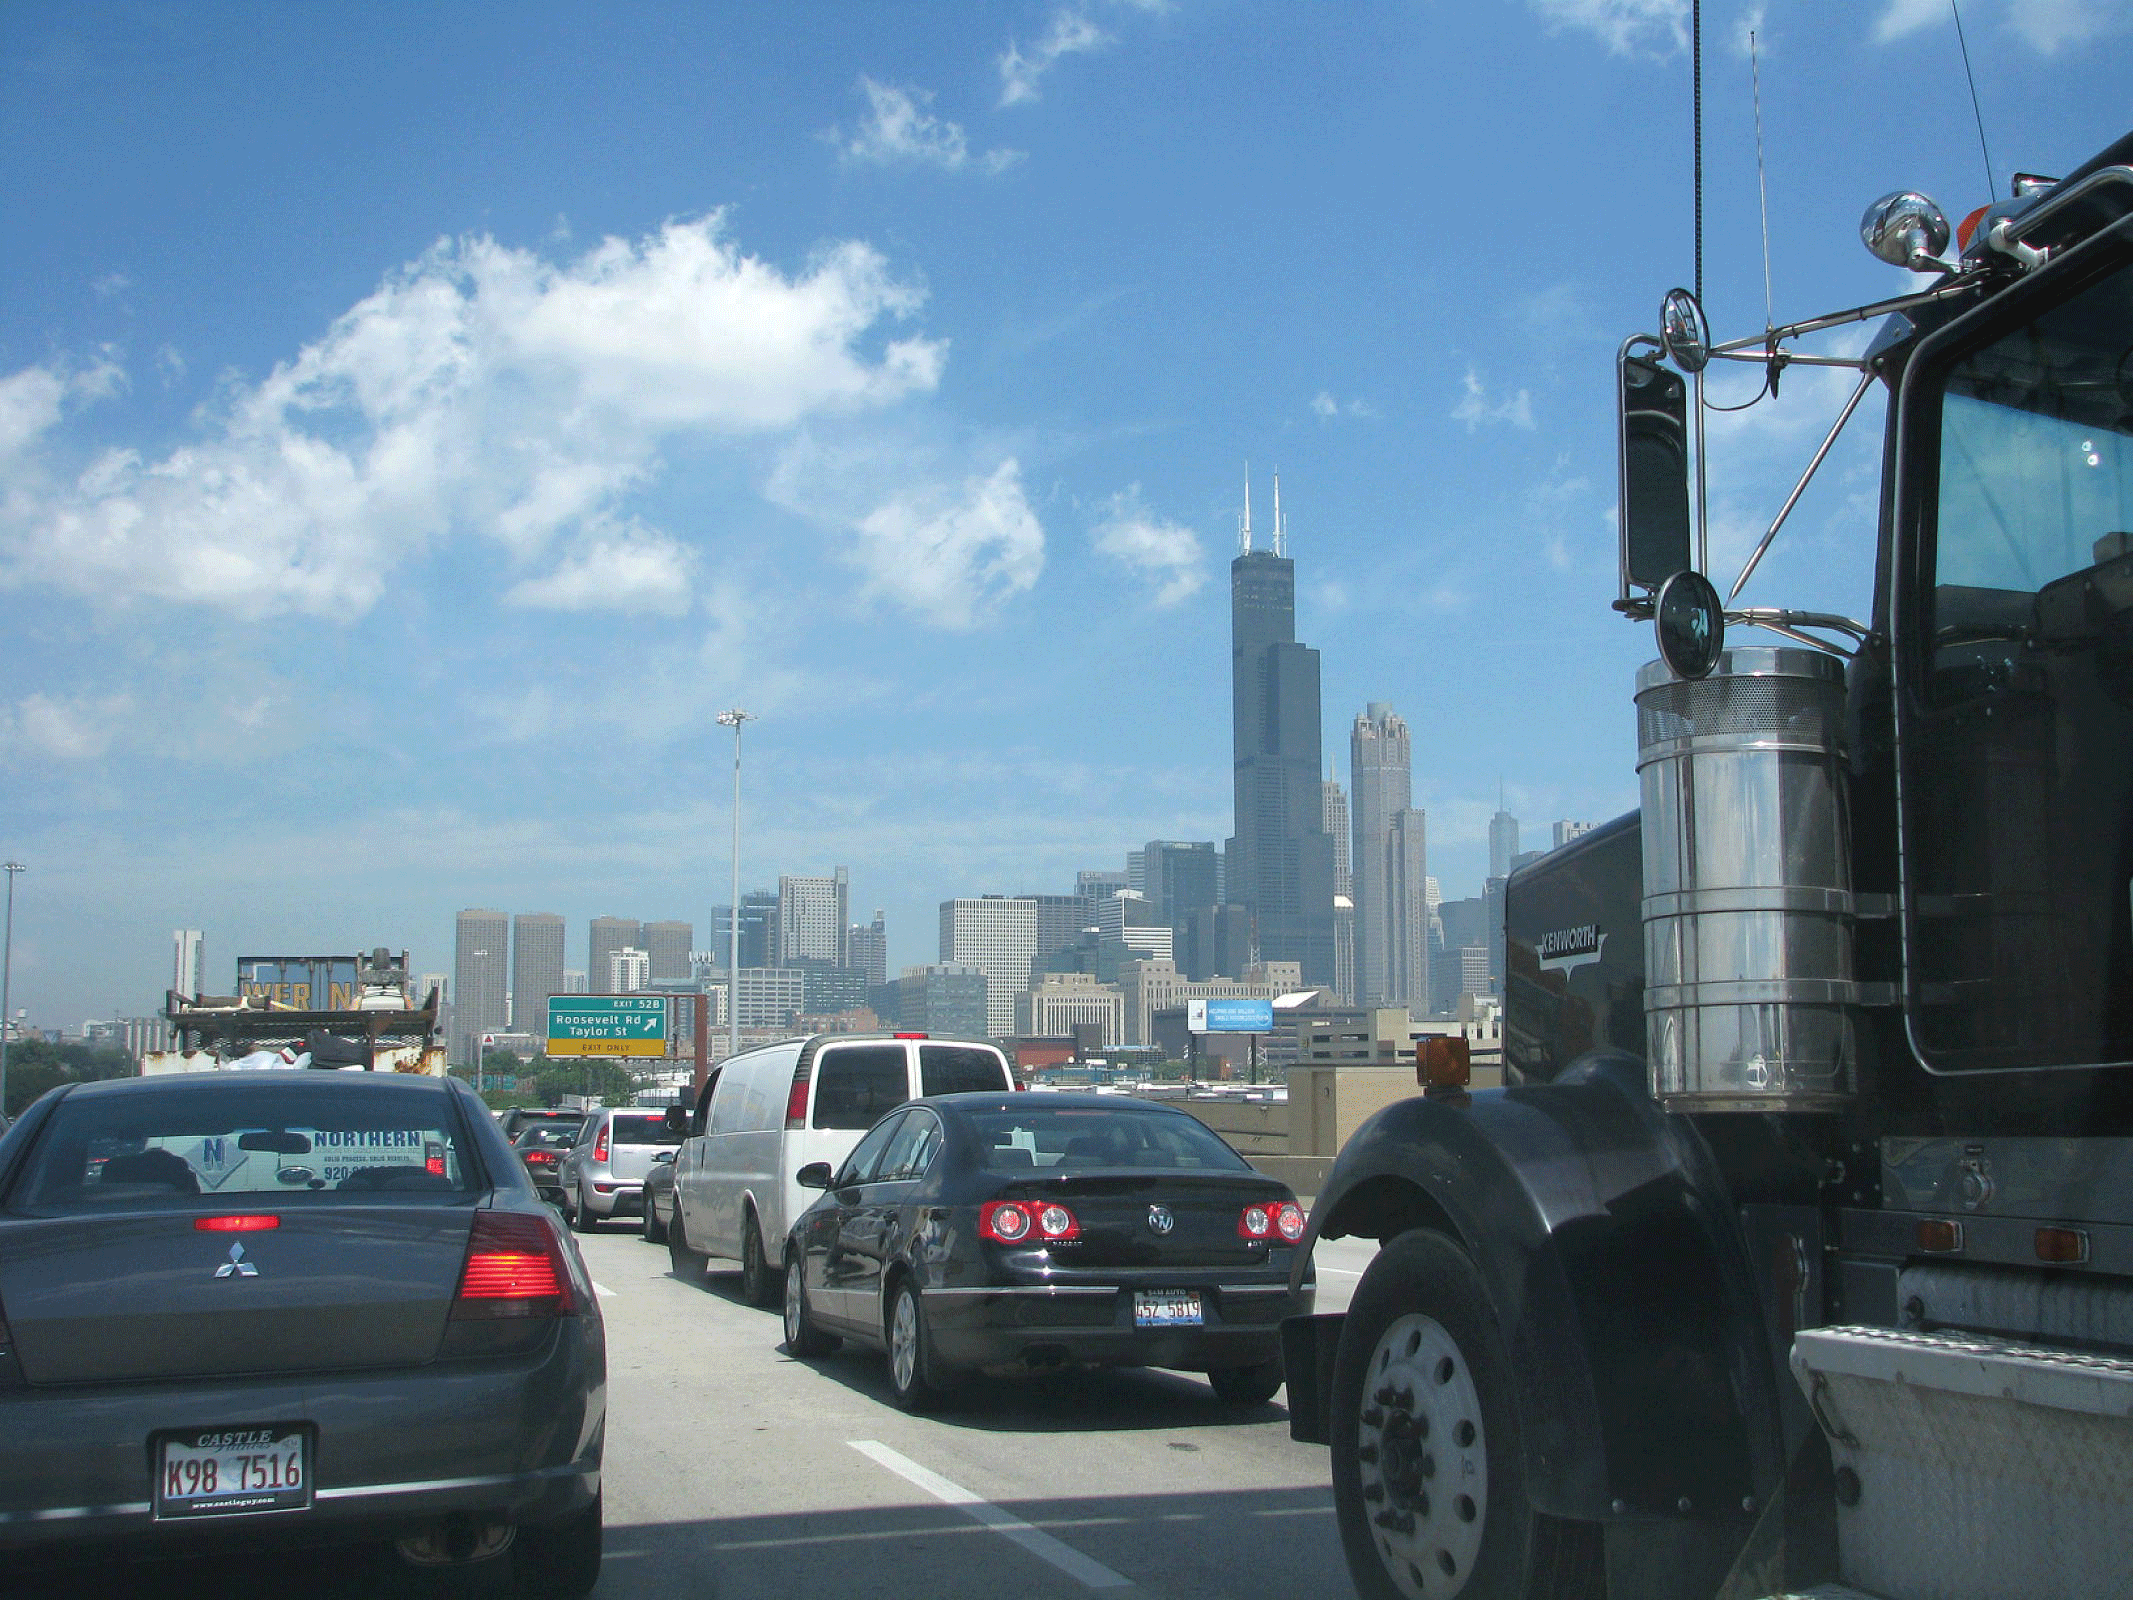 The urban Chicago area has been expanding into surrounding Illinois farmland areas.
                        Photograph credit: Eileen Hornbaker, U.S. Fish and Wildlife Service.